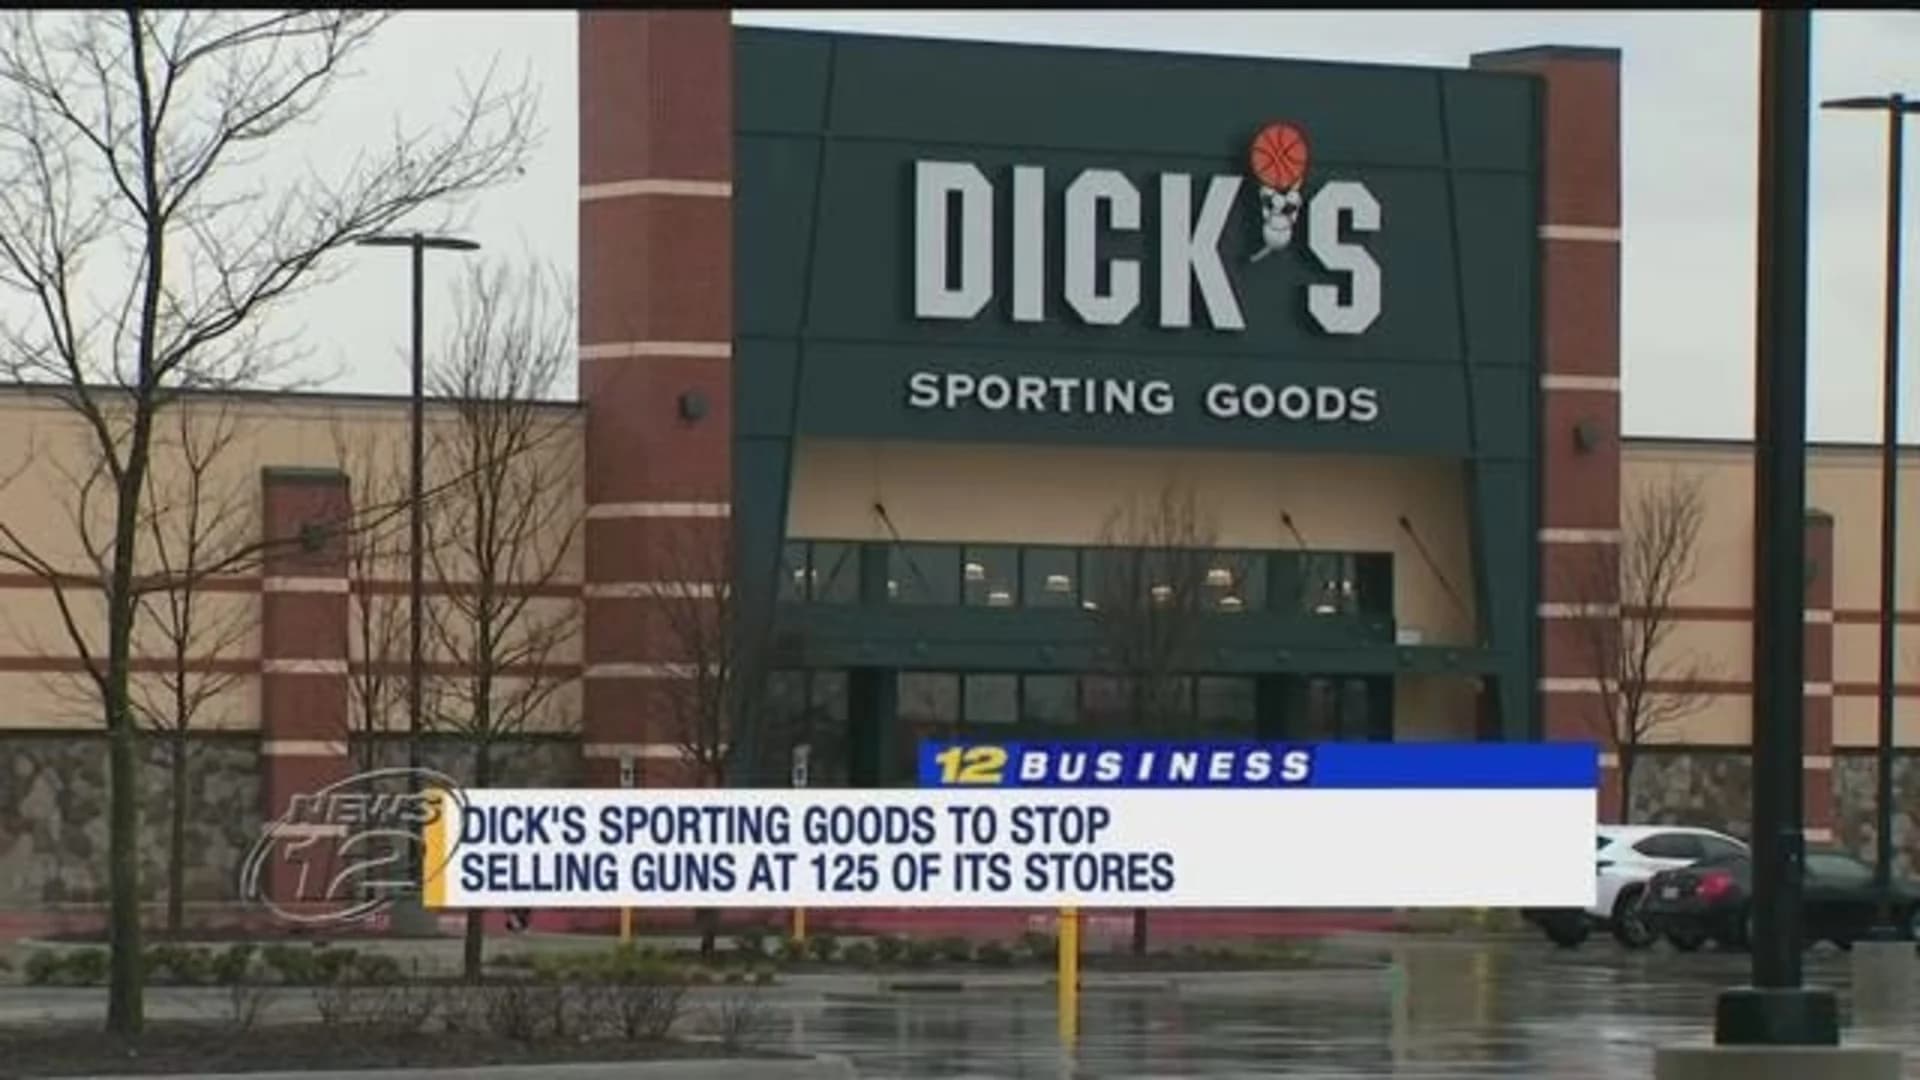 Dick's Sporting Goods to stop selling guns at 125 locations